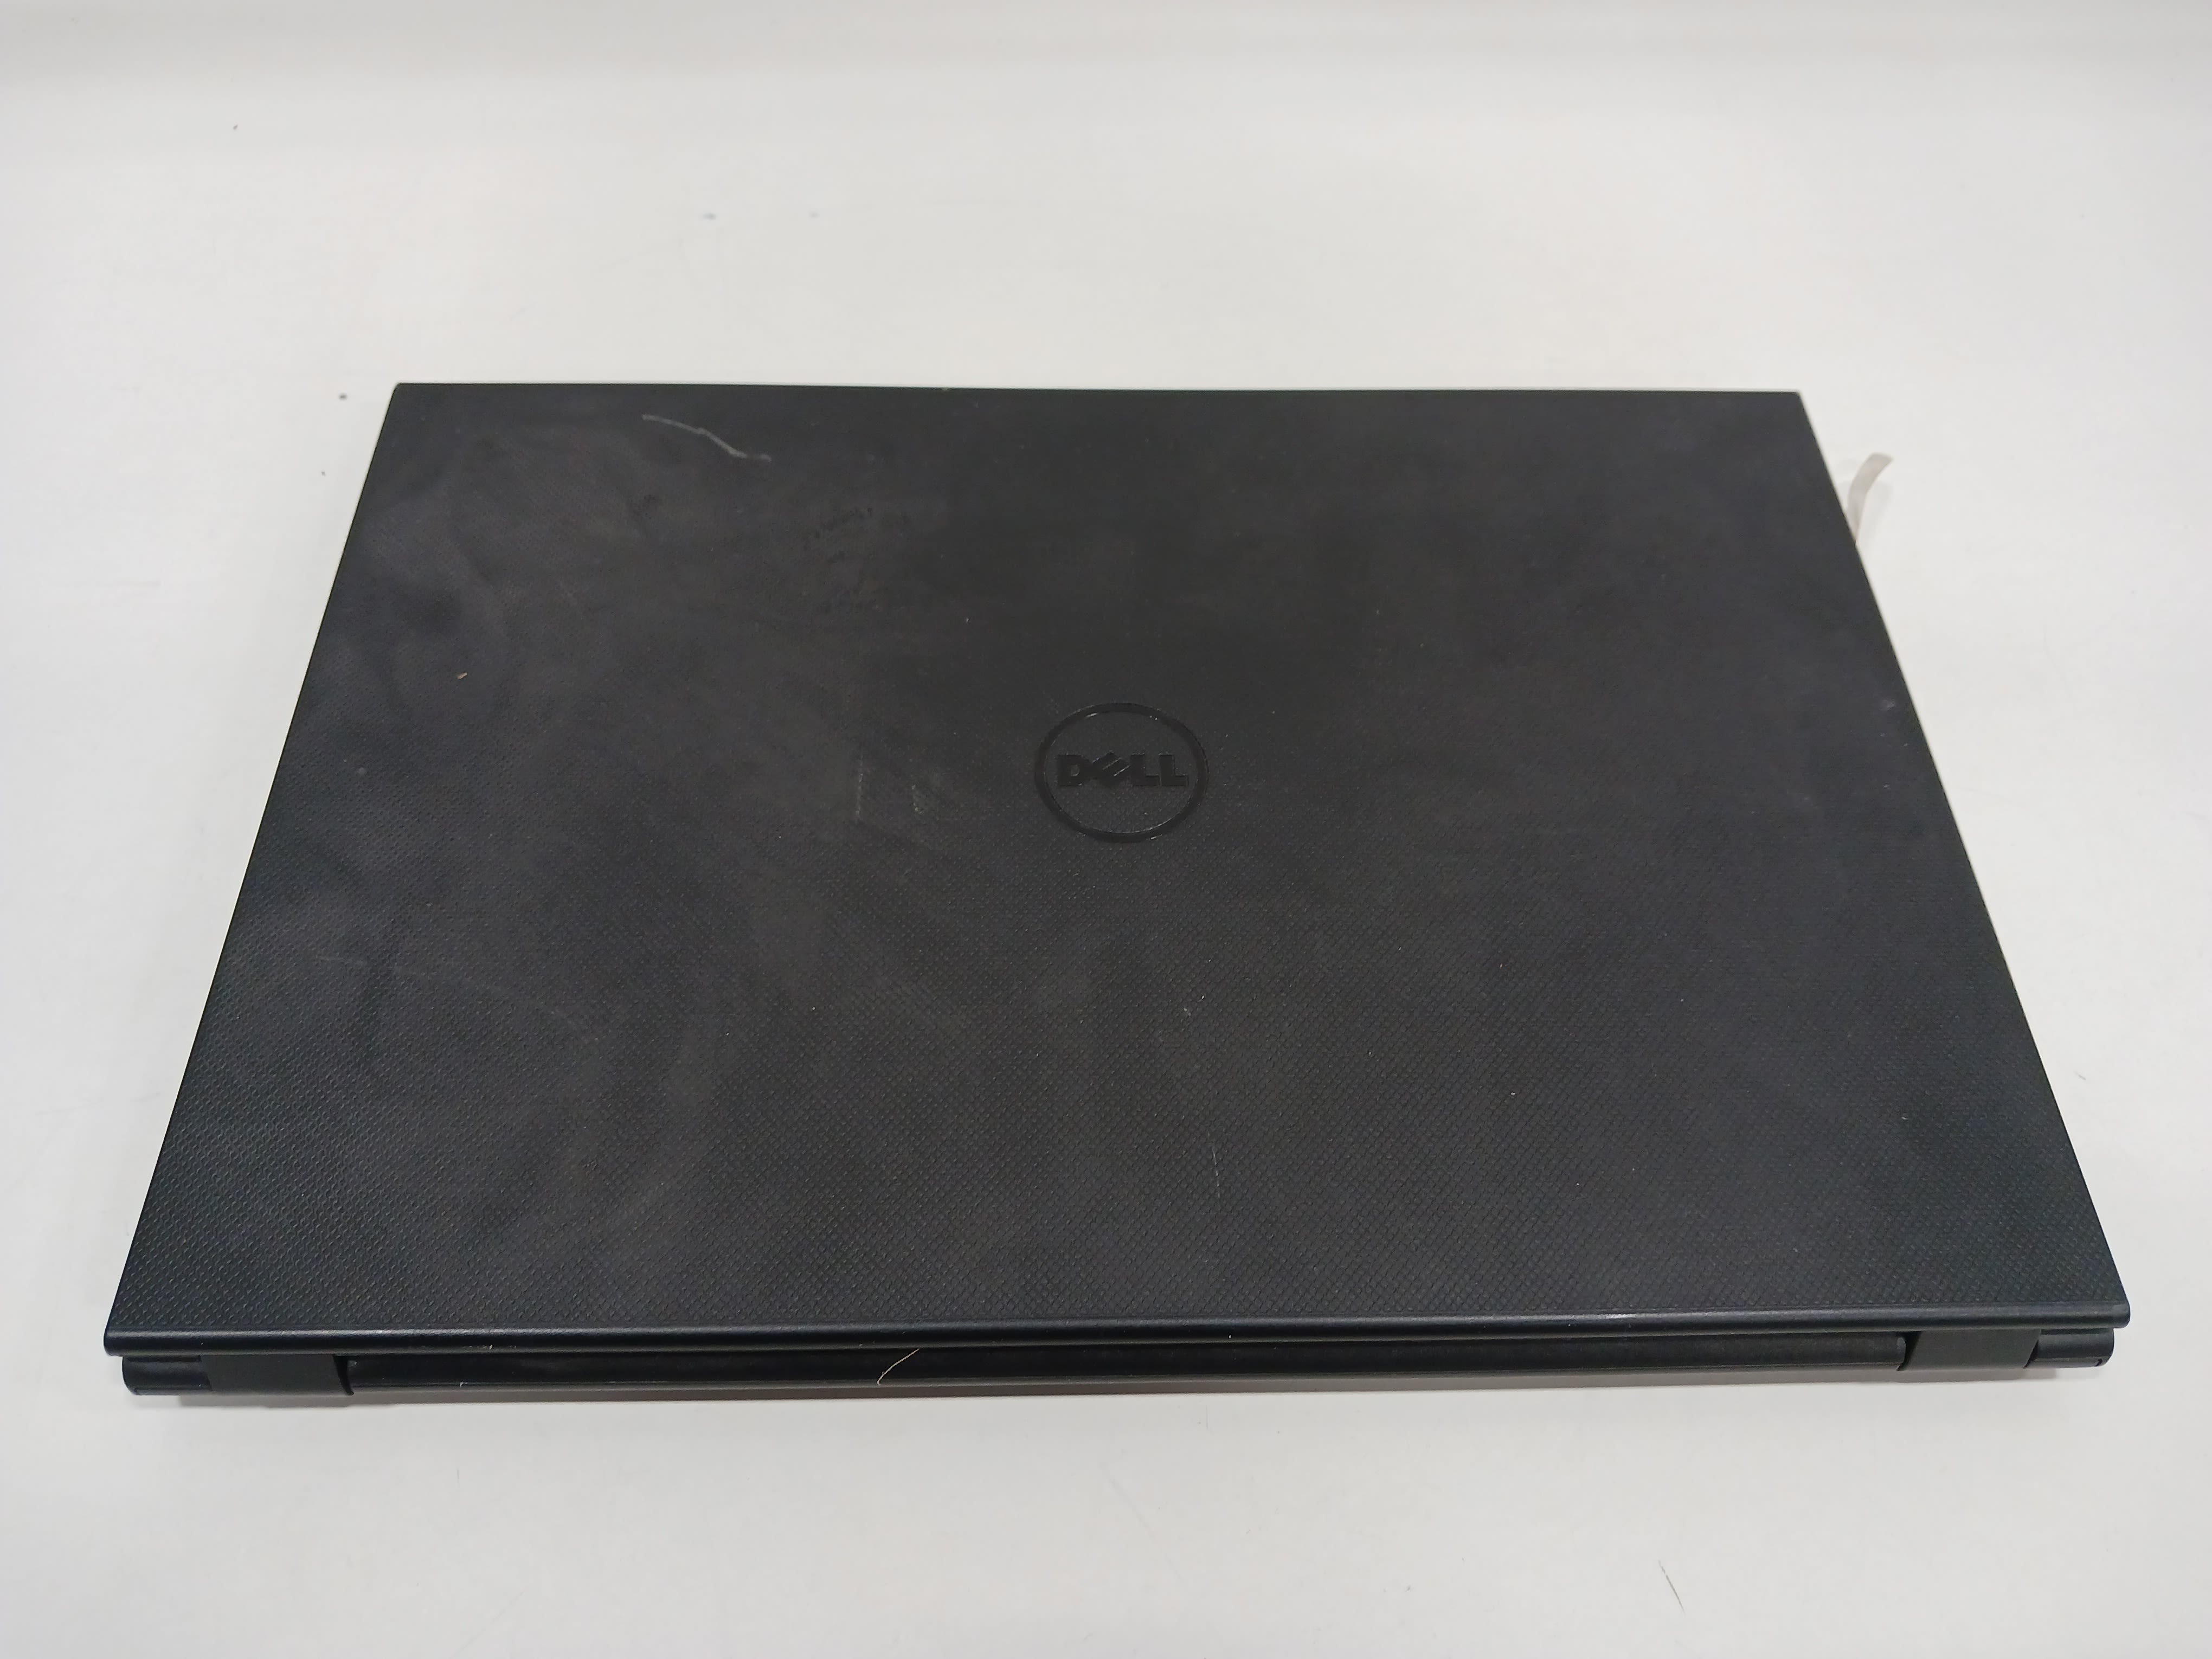 Buy the Dell Inspiron 15 3878 Intel Core i3 Laptop | GoodwillFinds